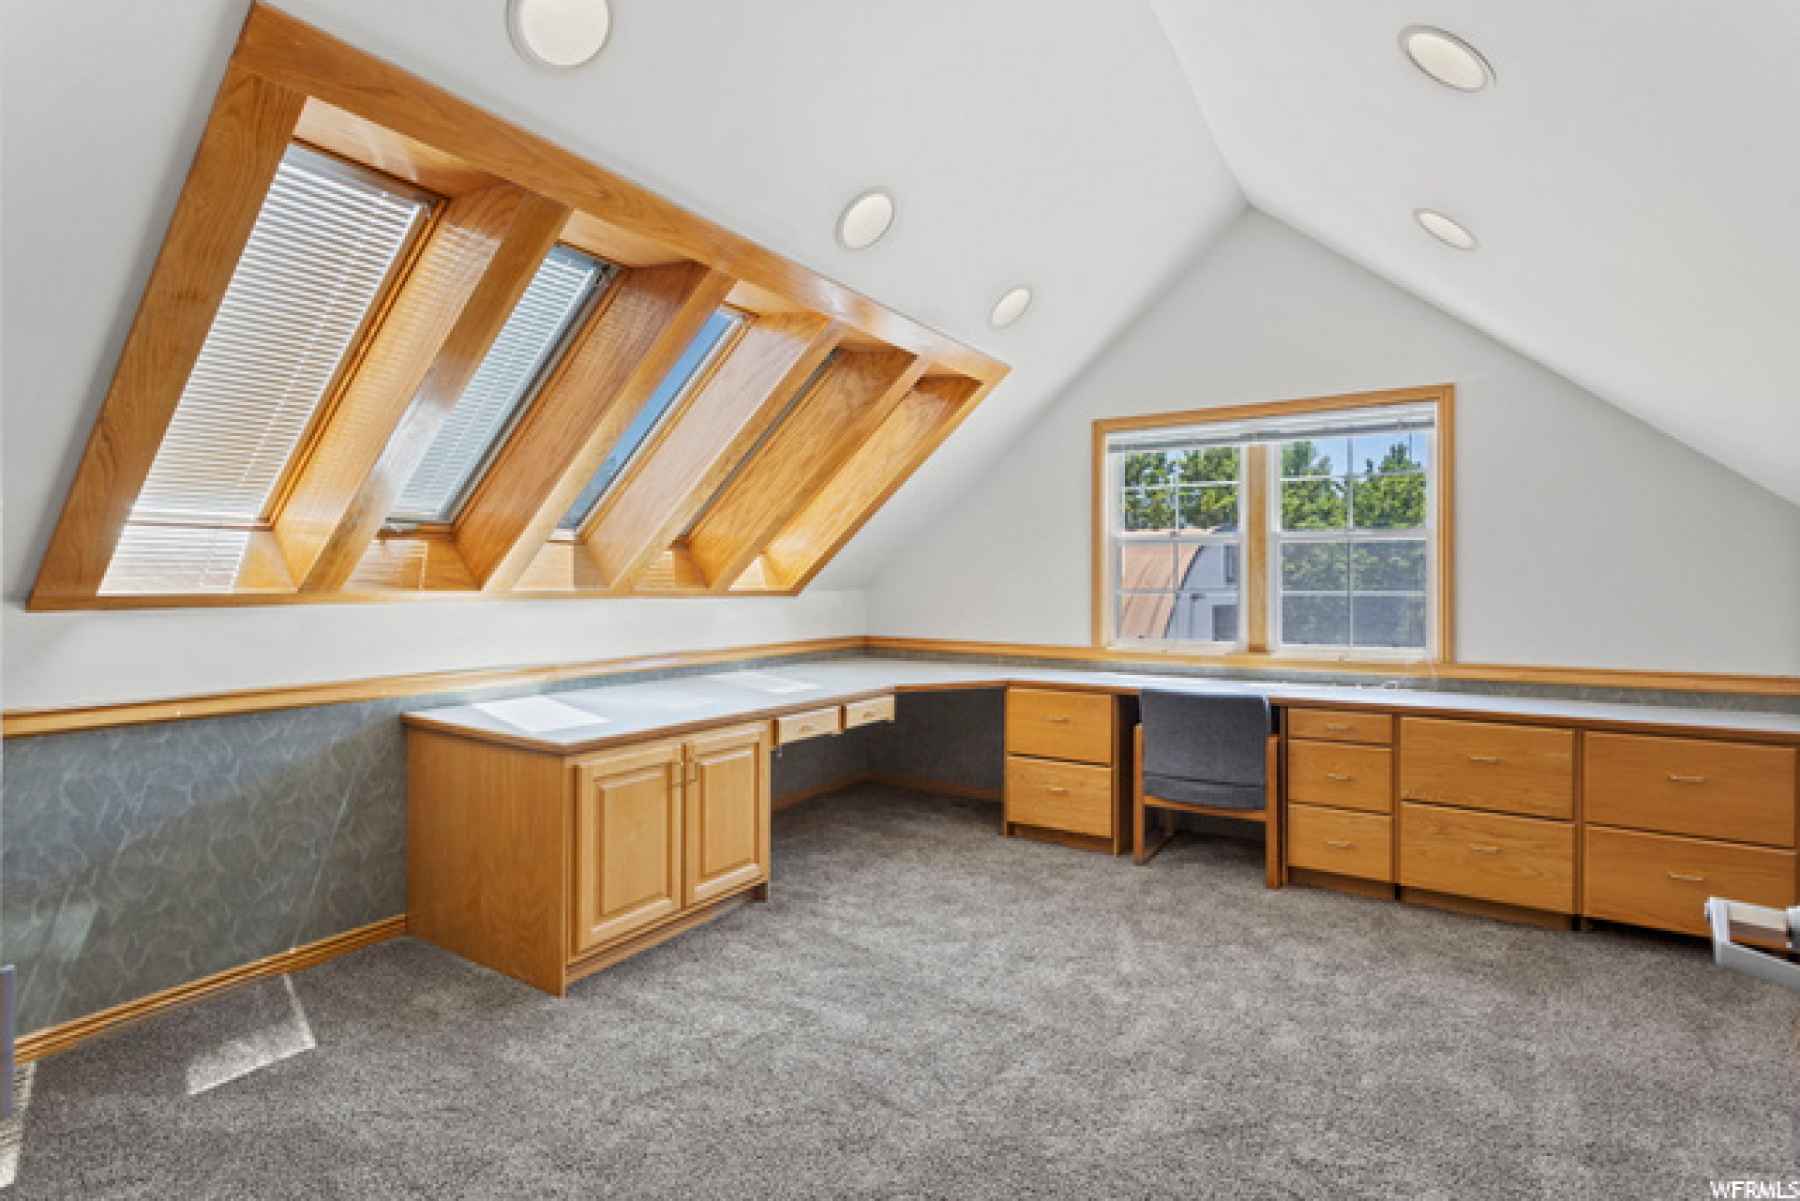 This bedroom has plenty of built in drawers and desk area as well as room for a bed!